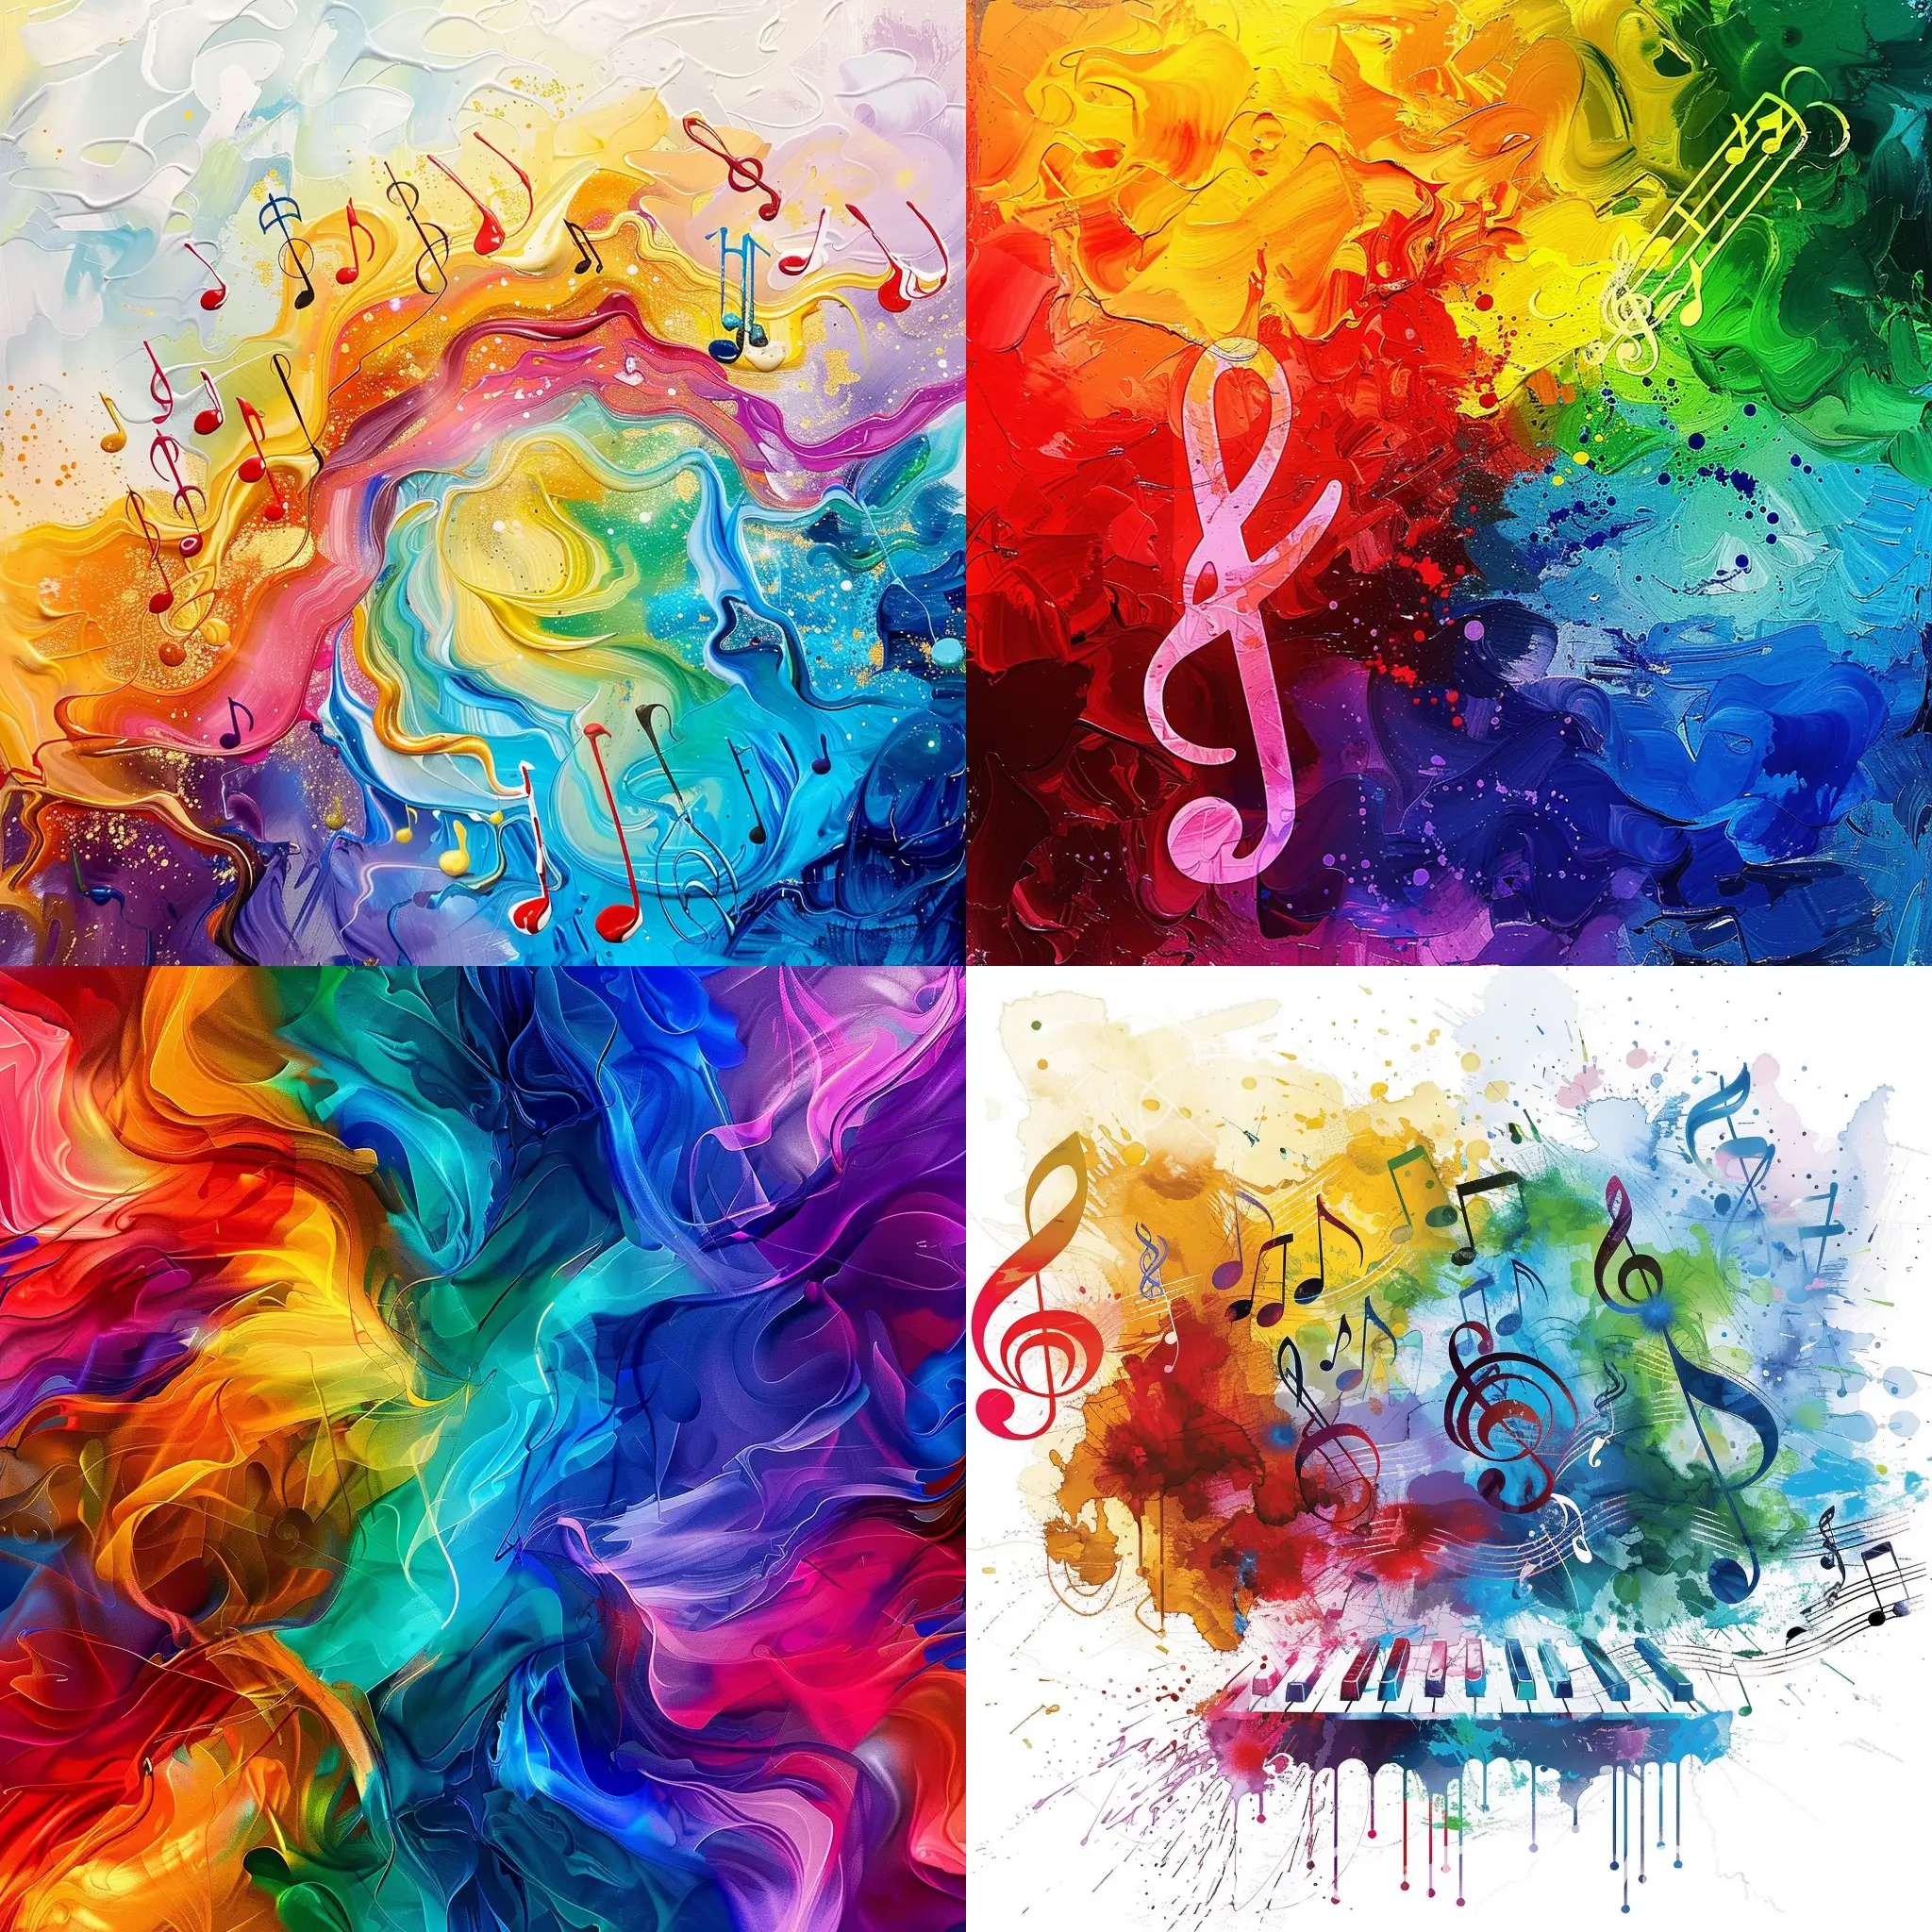 Vibrant-MusicalColor-Synesthesia-Art-Abstract-Composition-in-11-Aspect-Ratio